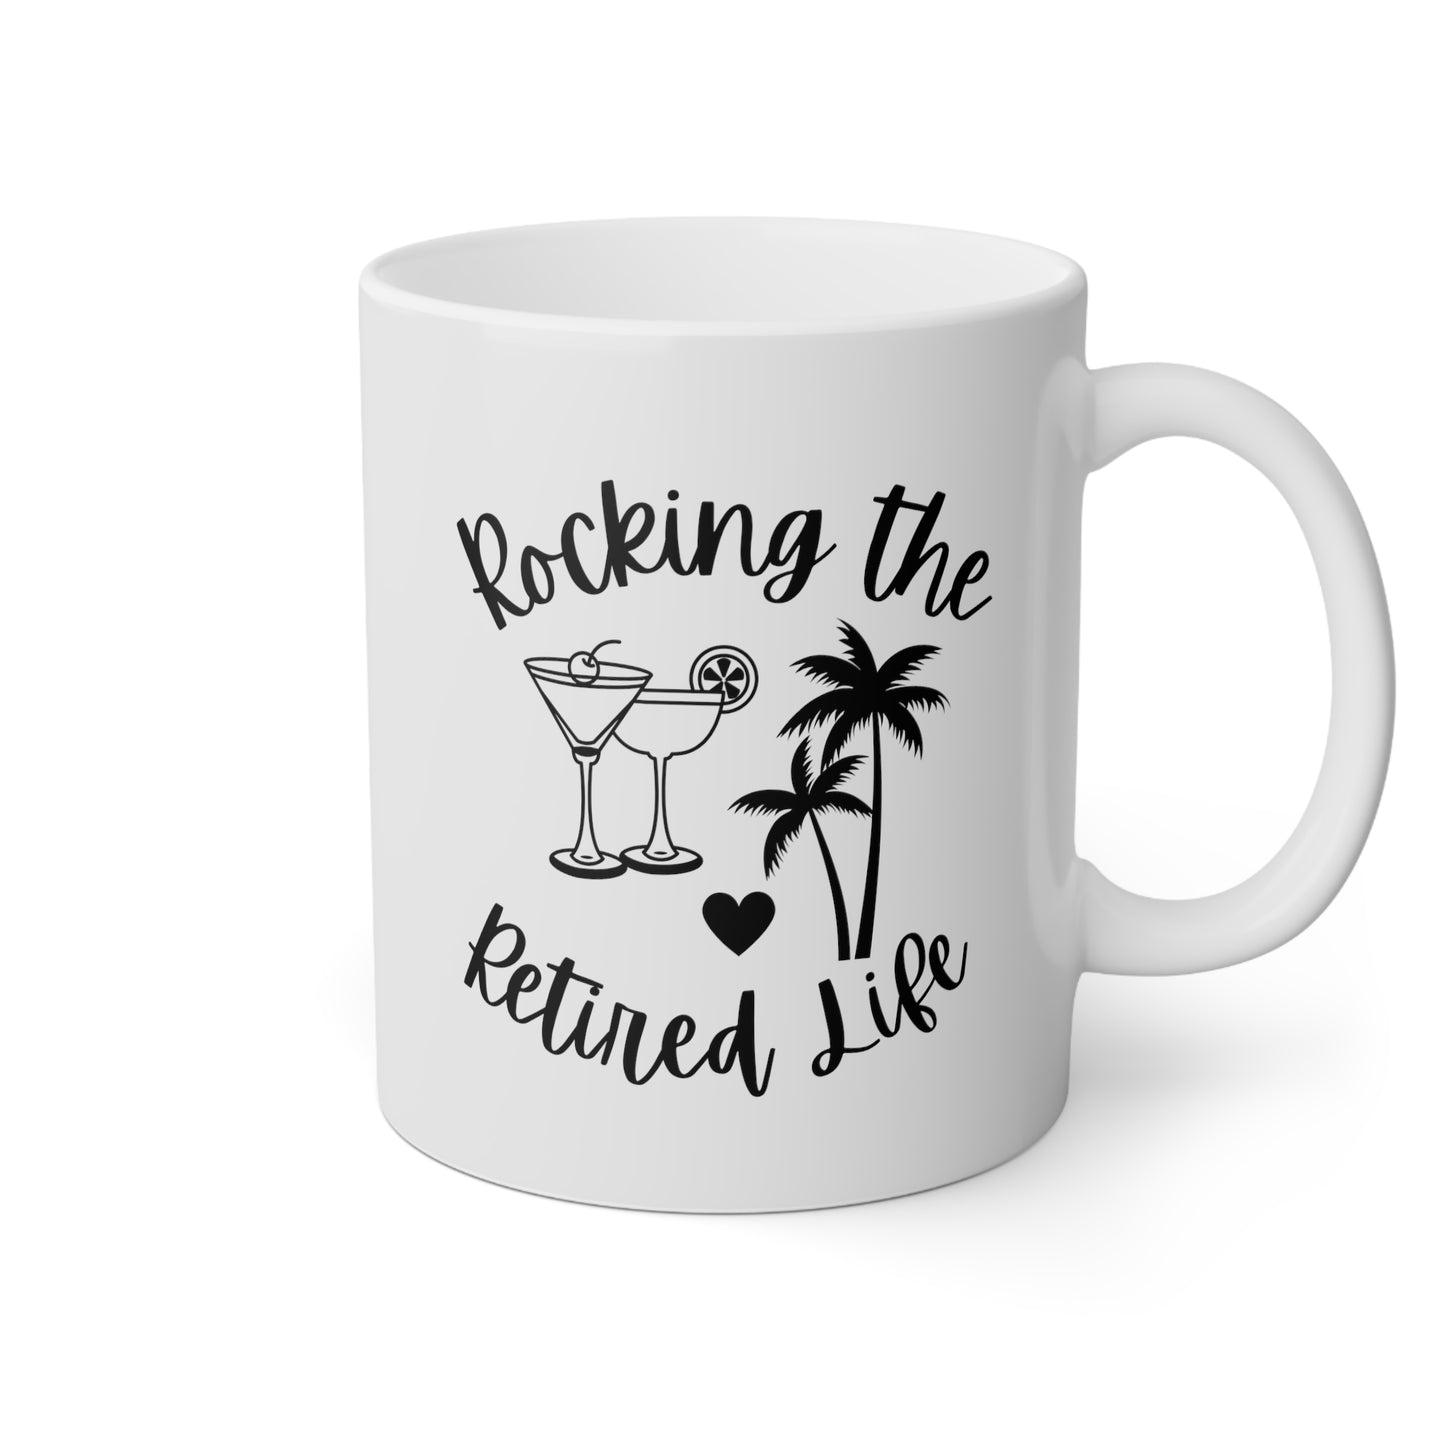 Rocking The Retired Life 11oz white funny large coffee mug gift for retirement party retiree her him waveywares wavey wares wavywares wavy wares